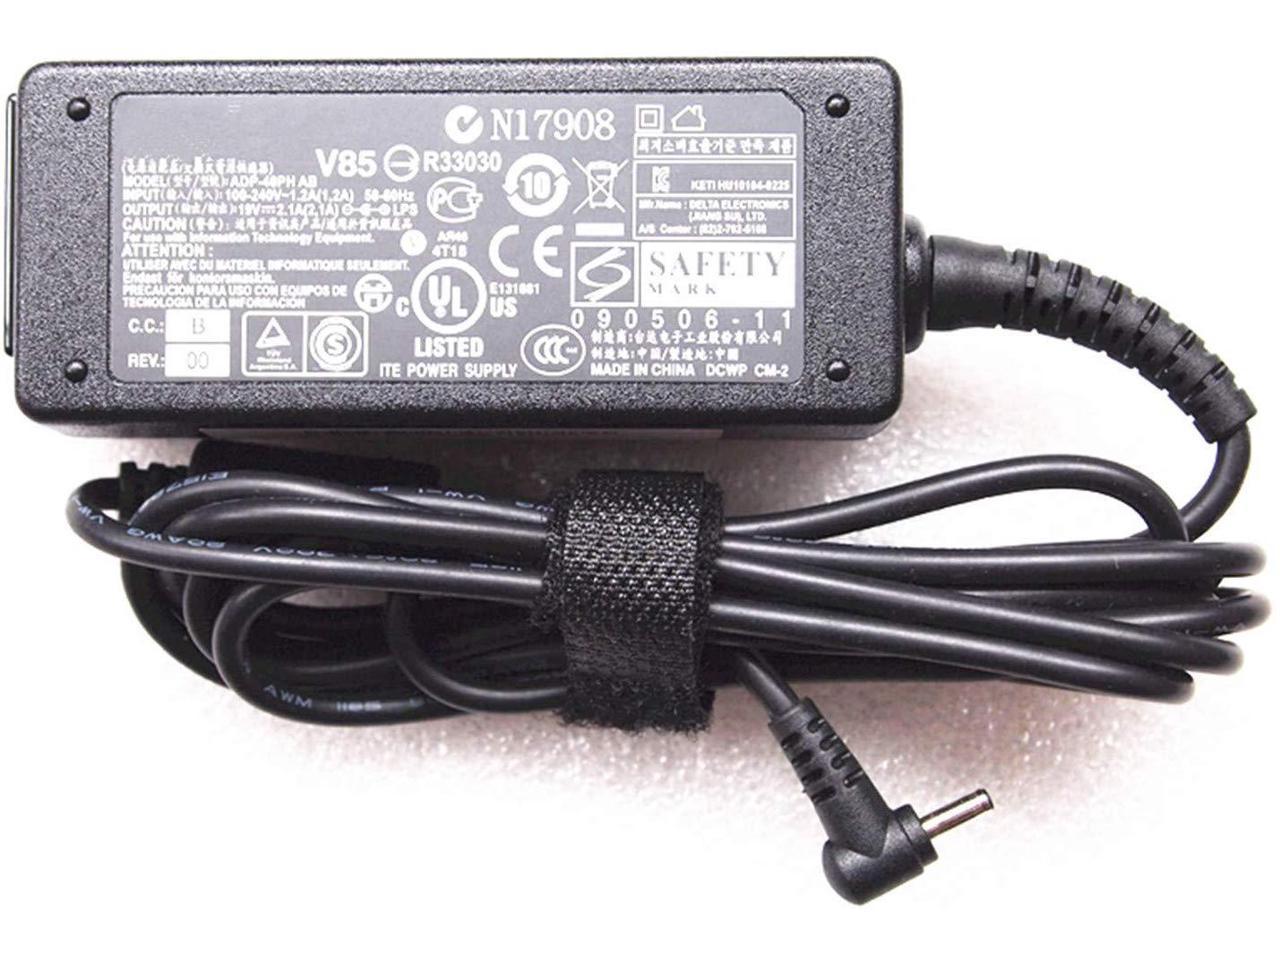 CASIO AD-E95E KEYBOARD 9.5V 1.0A POWER SUPPLY REPLACEMENT ADAPTER UK 